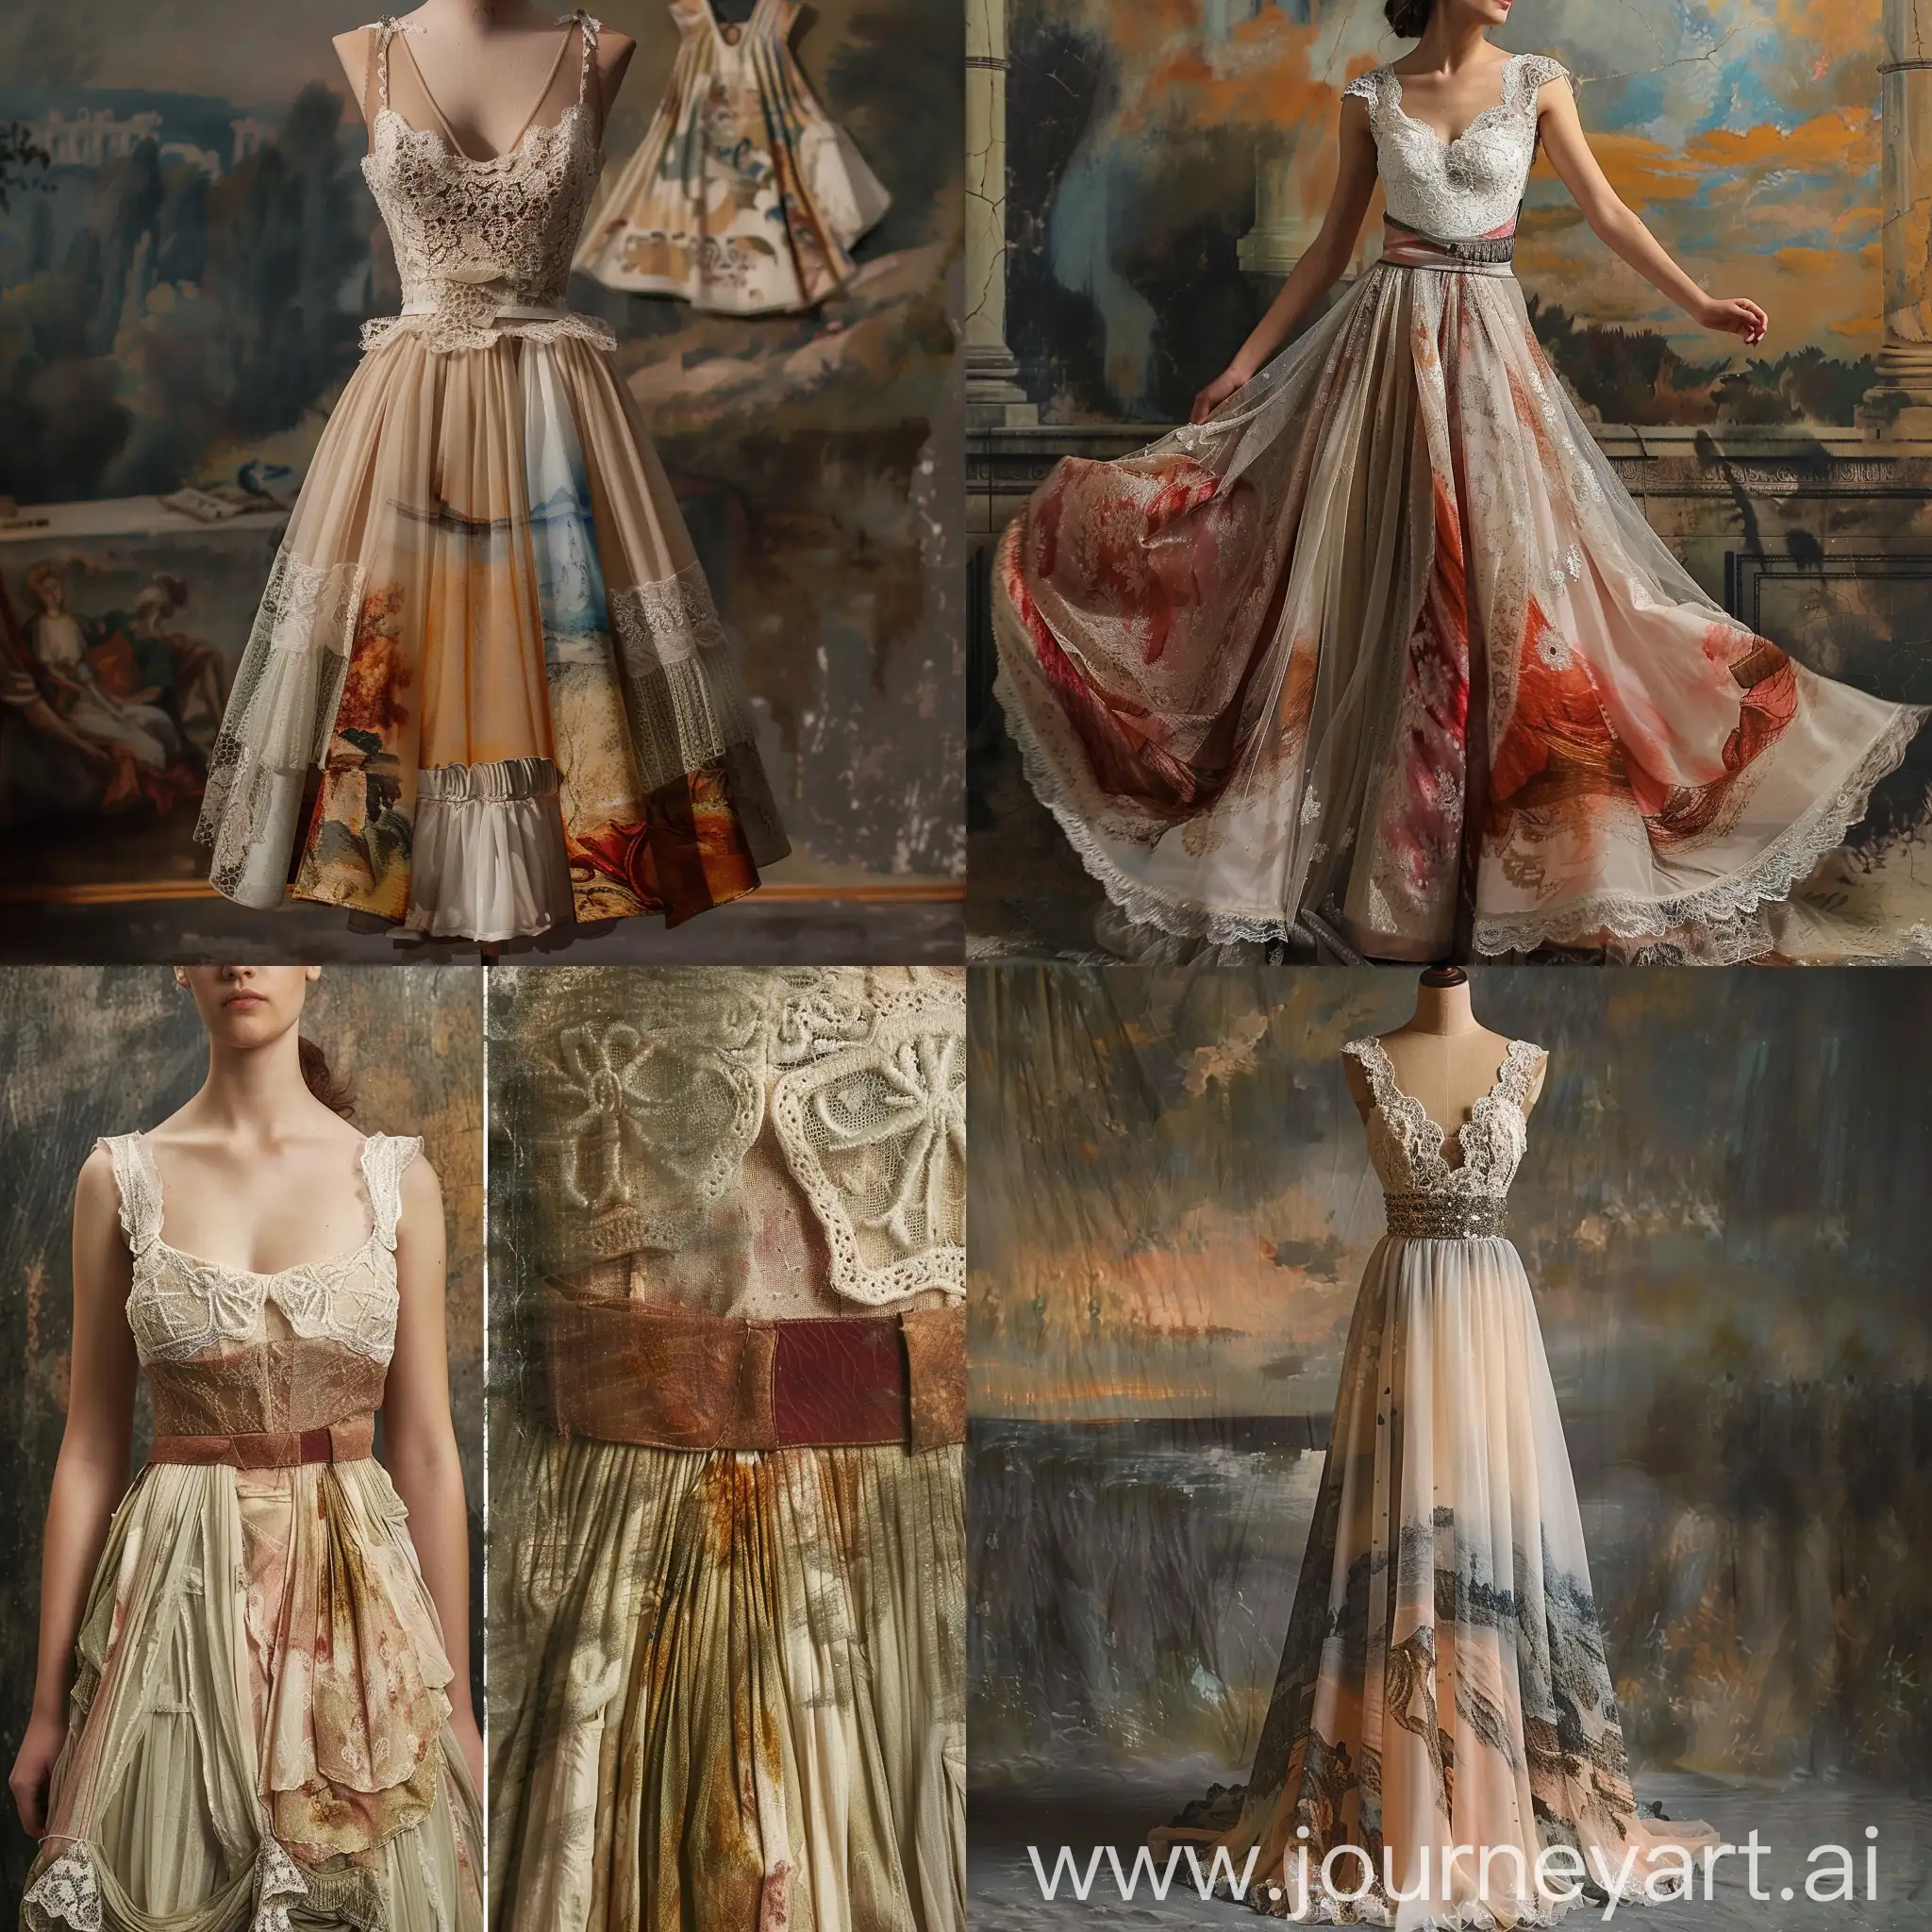 Elegant-Lace-and-Greek-Aesthetics-Sensual-Femininity-in-Oil-Painting-Style